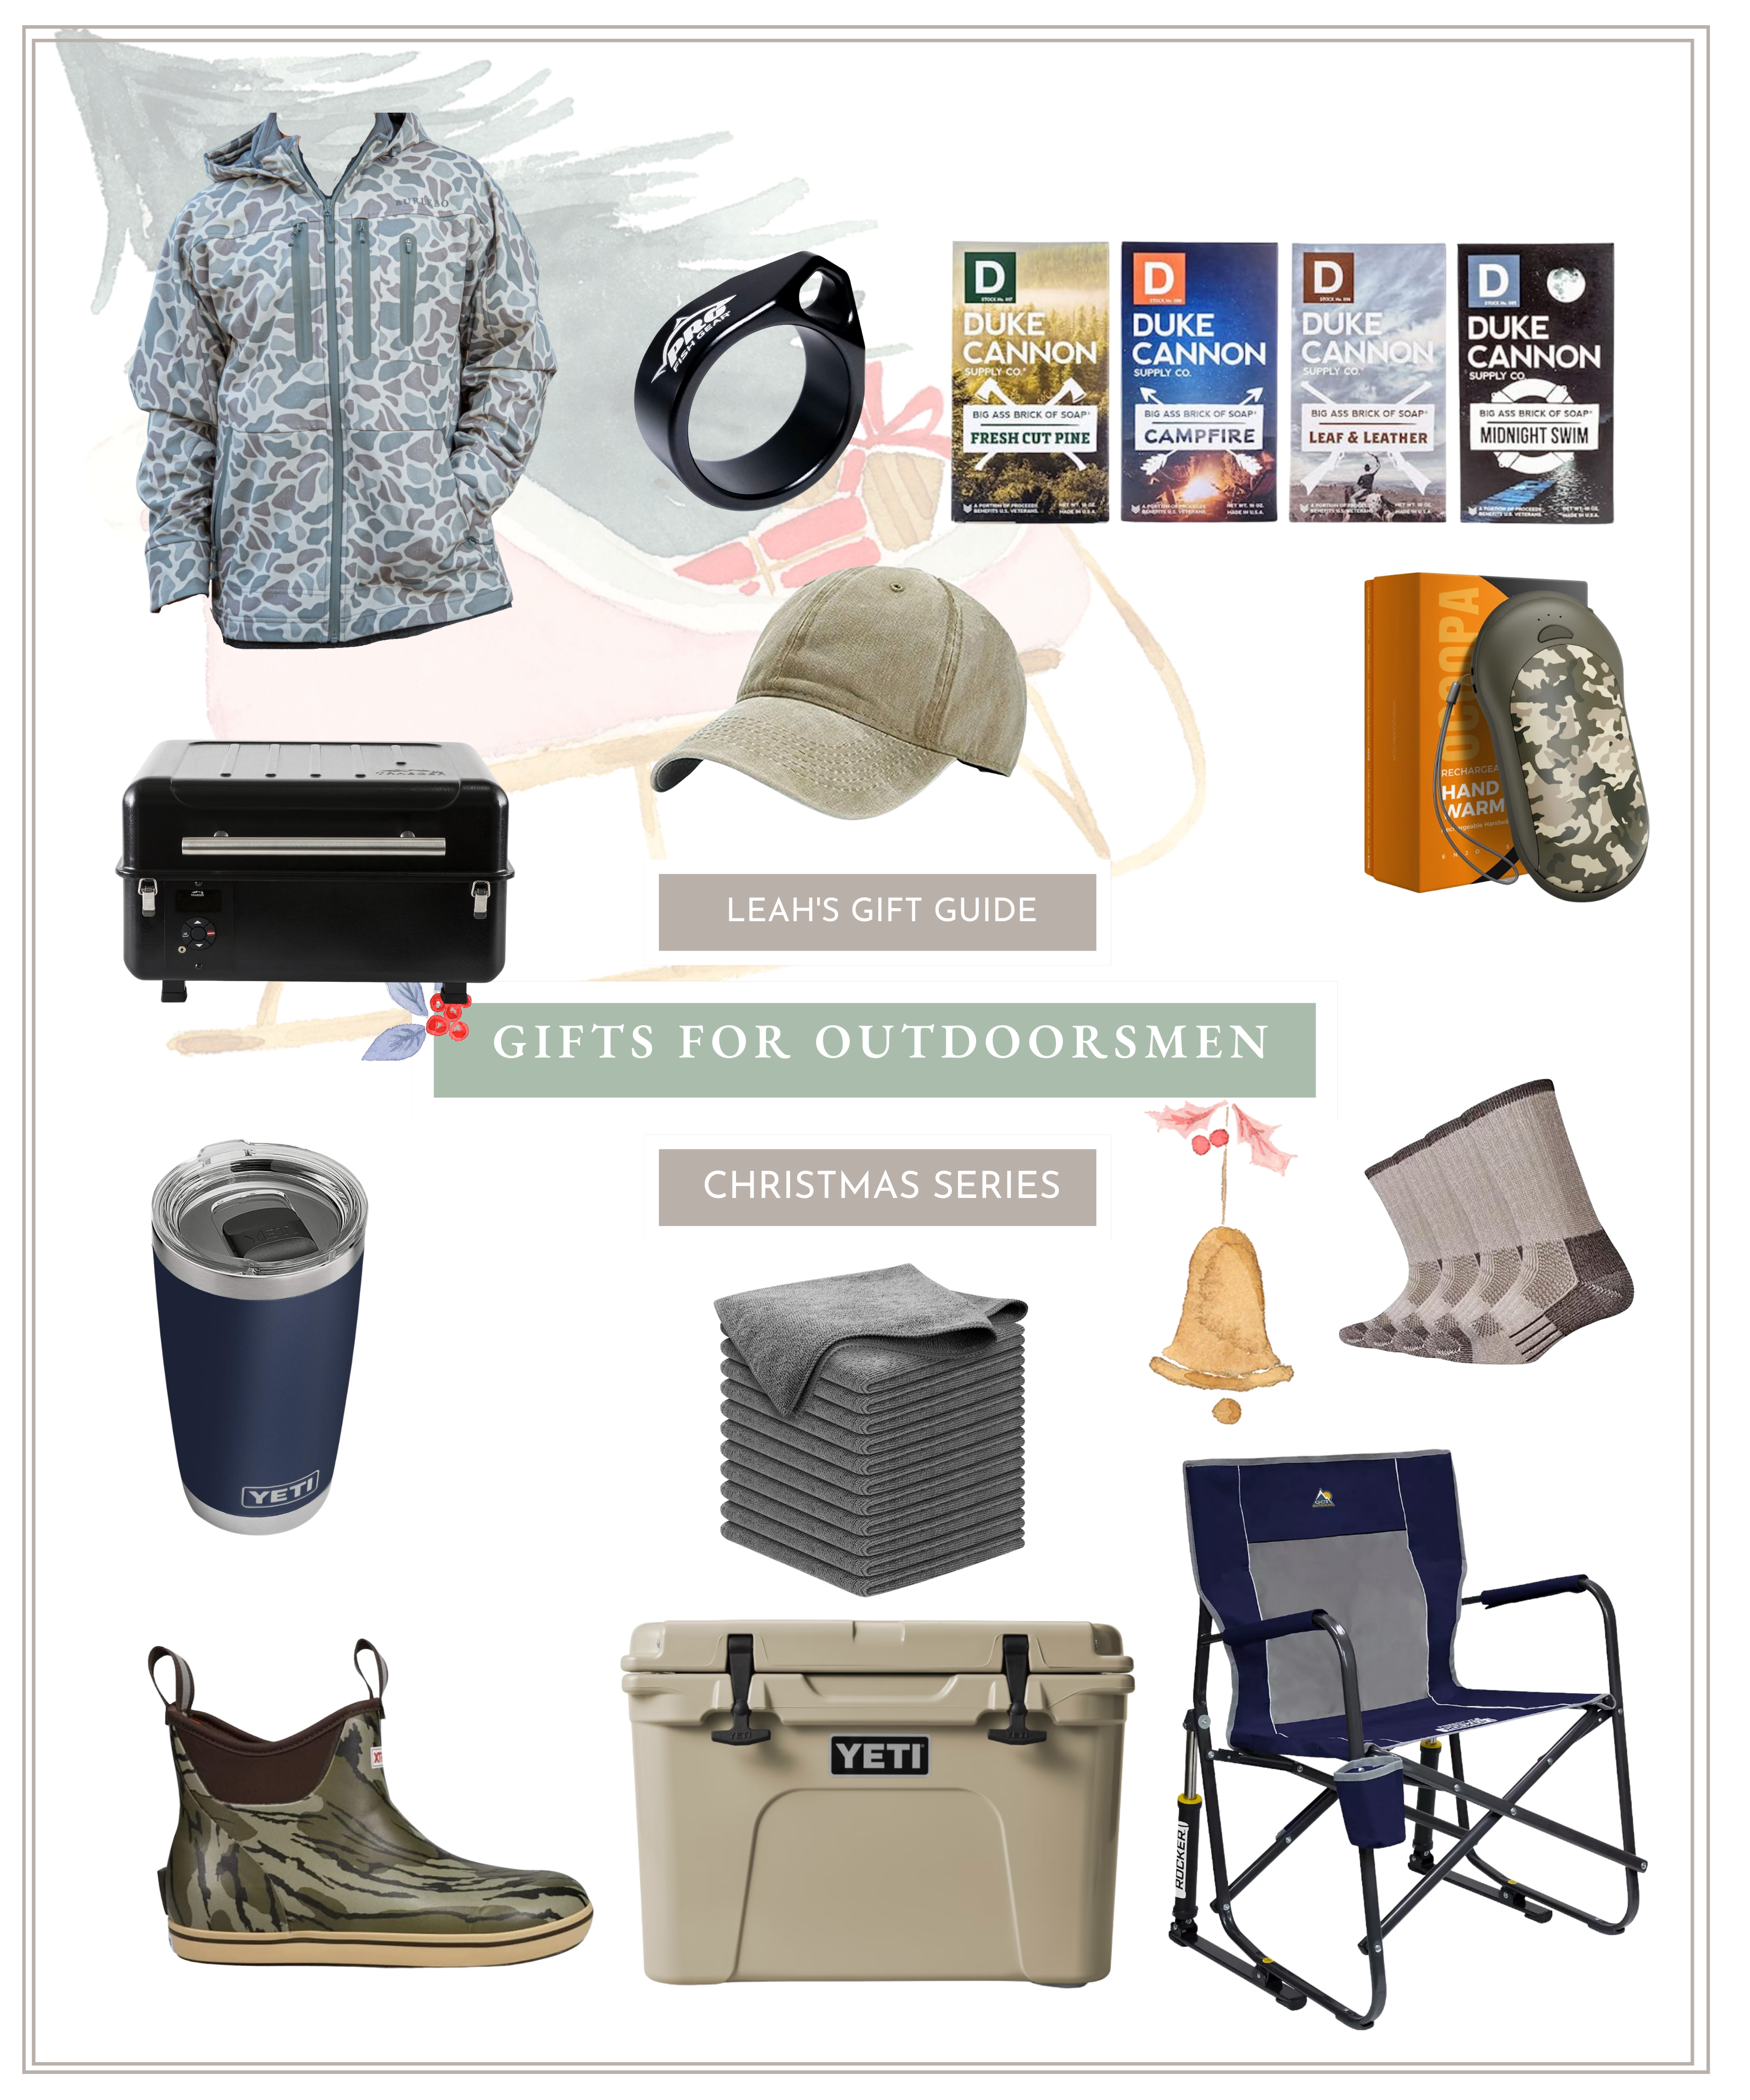 Gifts for the Outdoorsmen